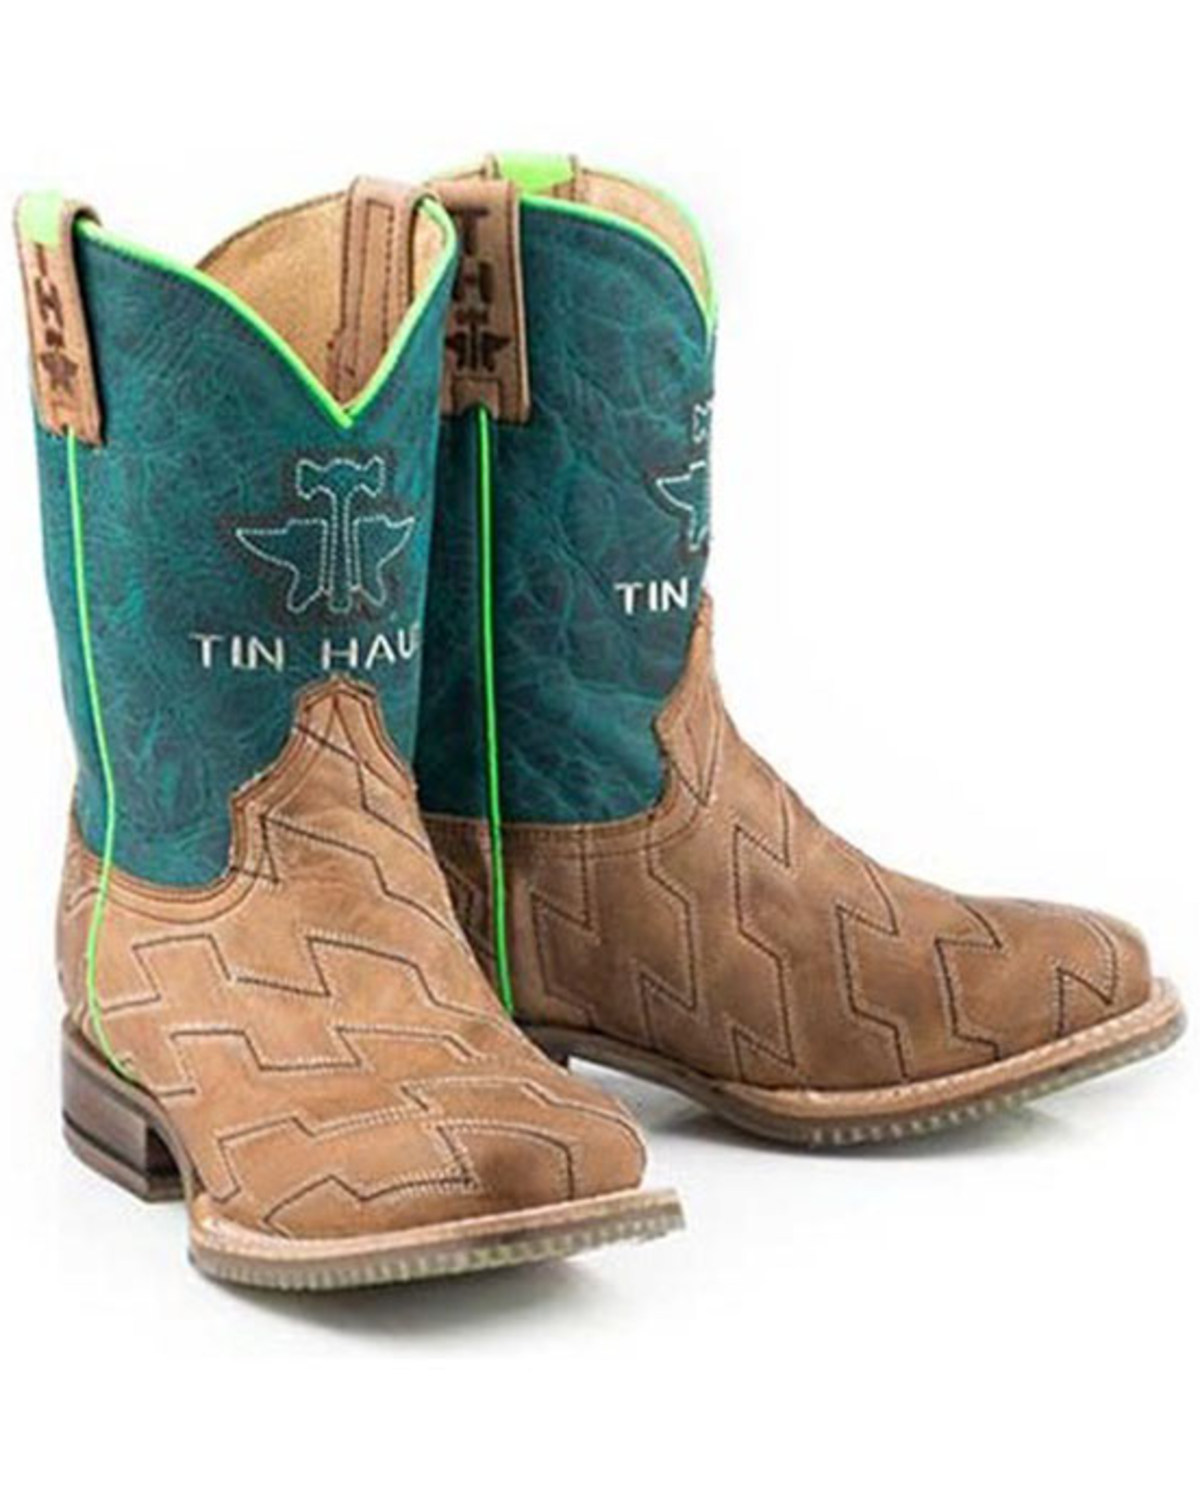 Tin Haul Boys' Horse Power Western Boots - Broad Square Toe